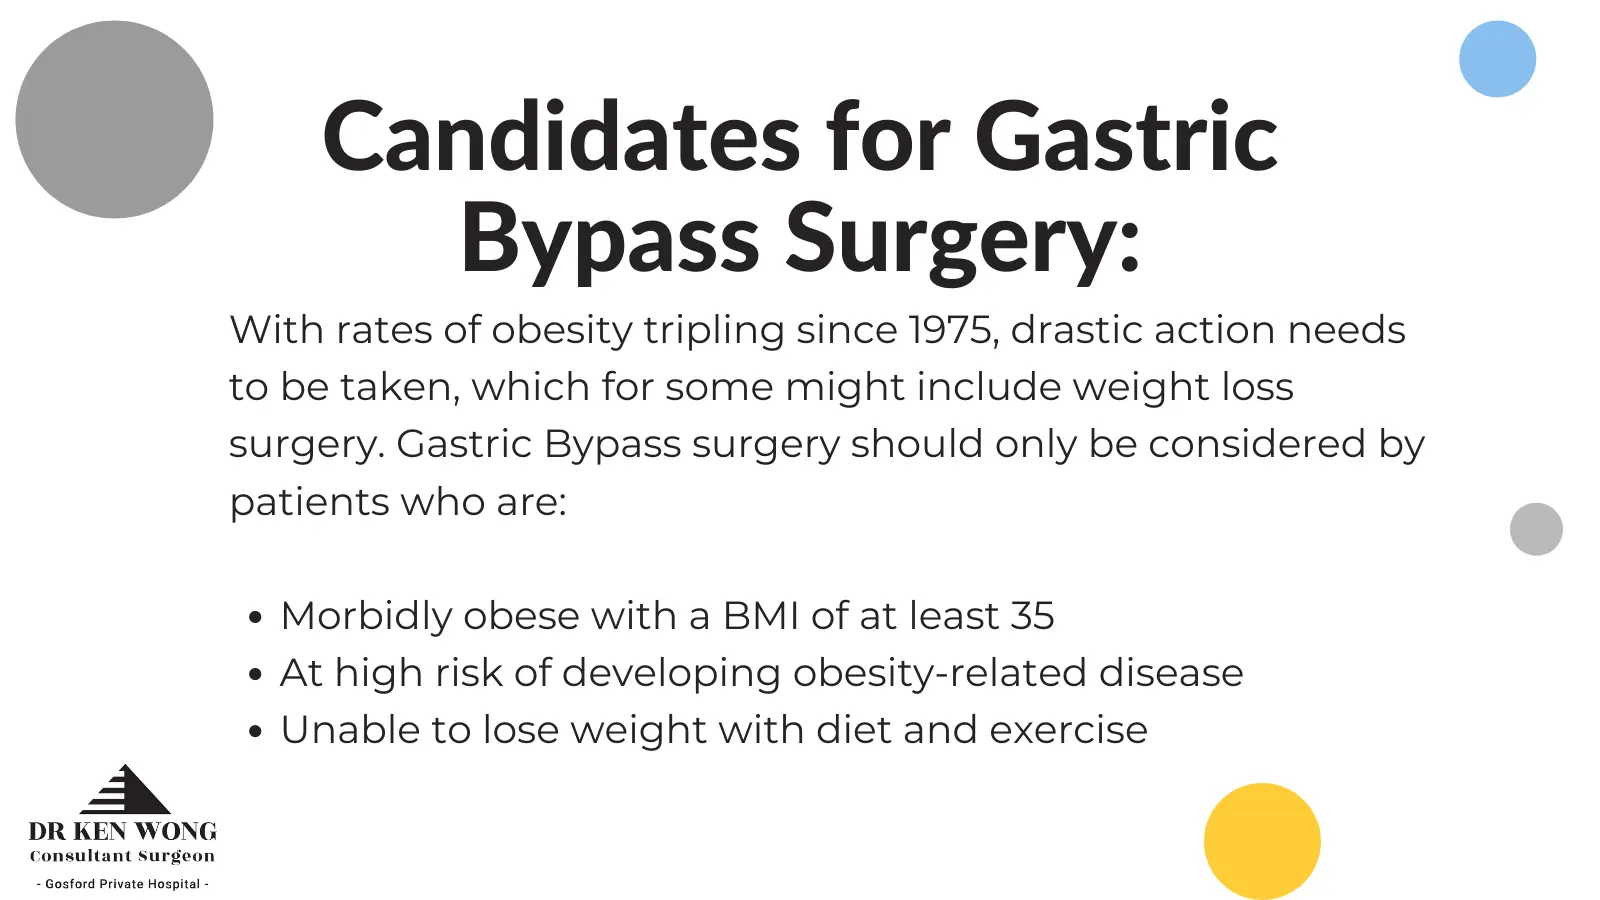 Do You Have to Be Obese to Get Gastric Bypass